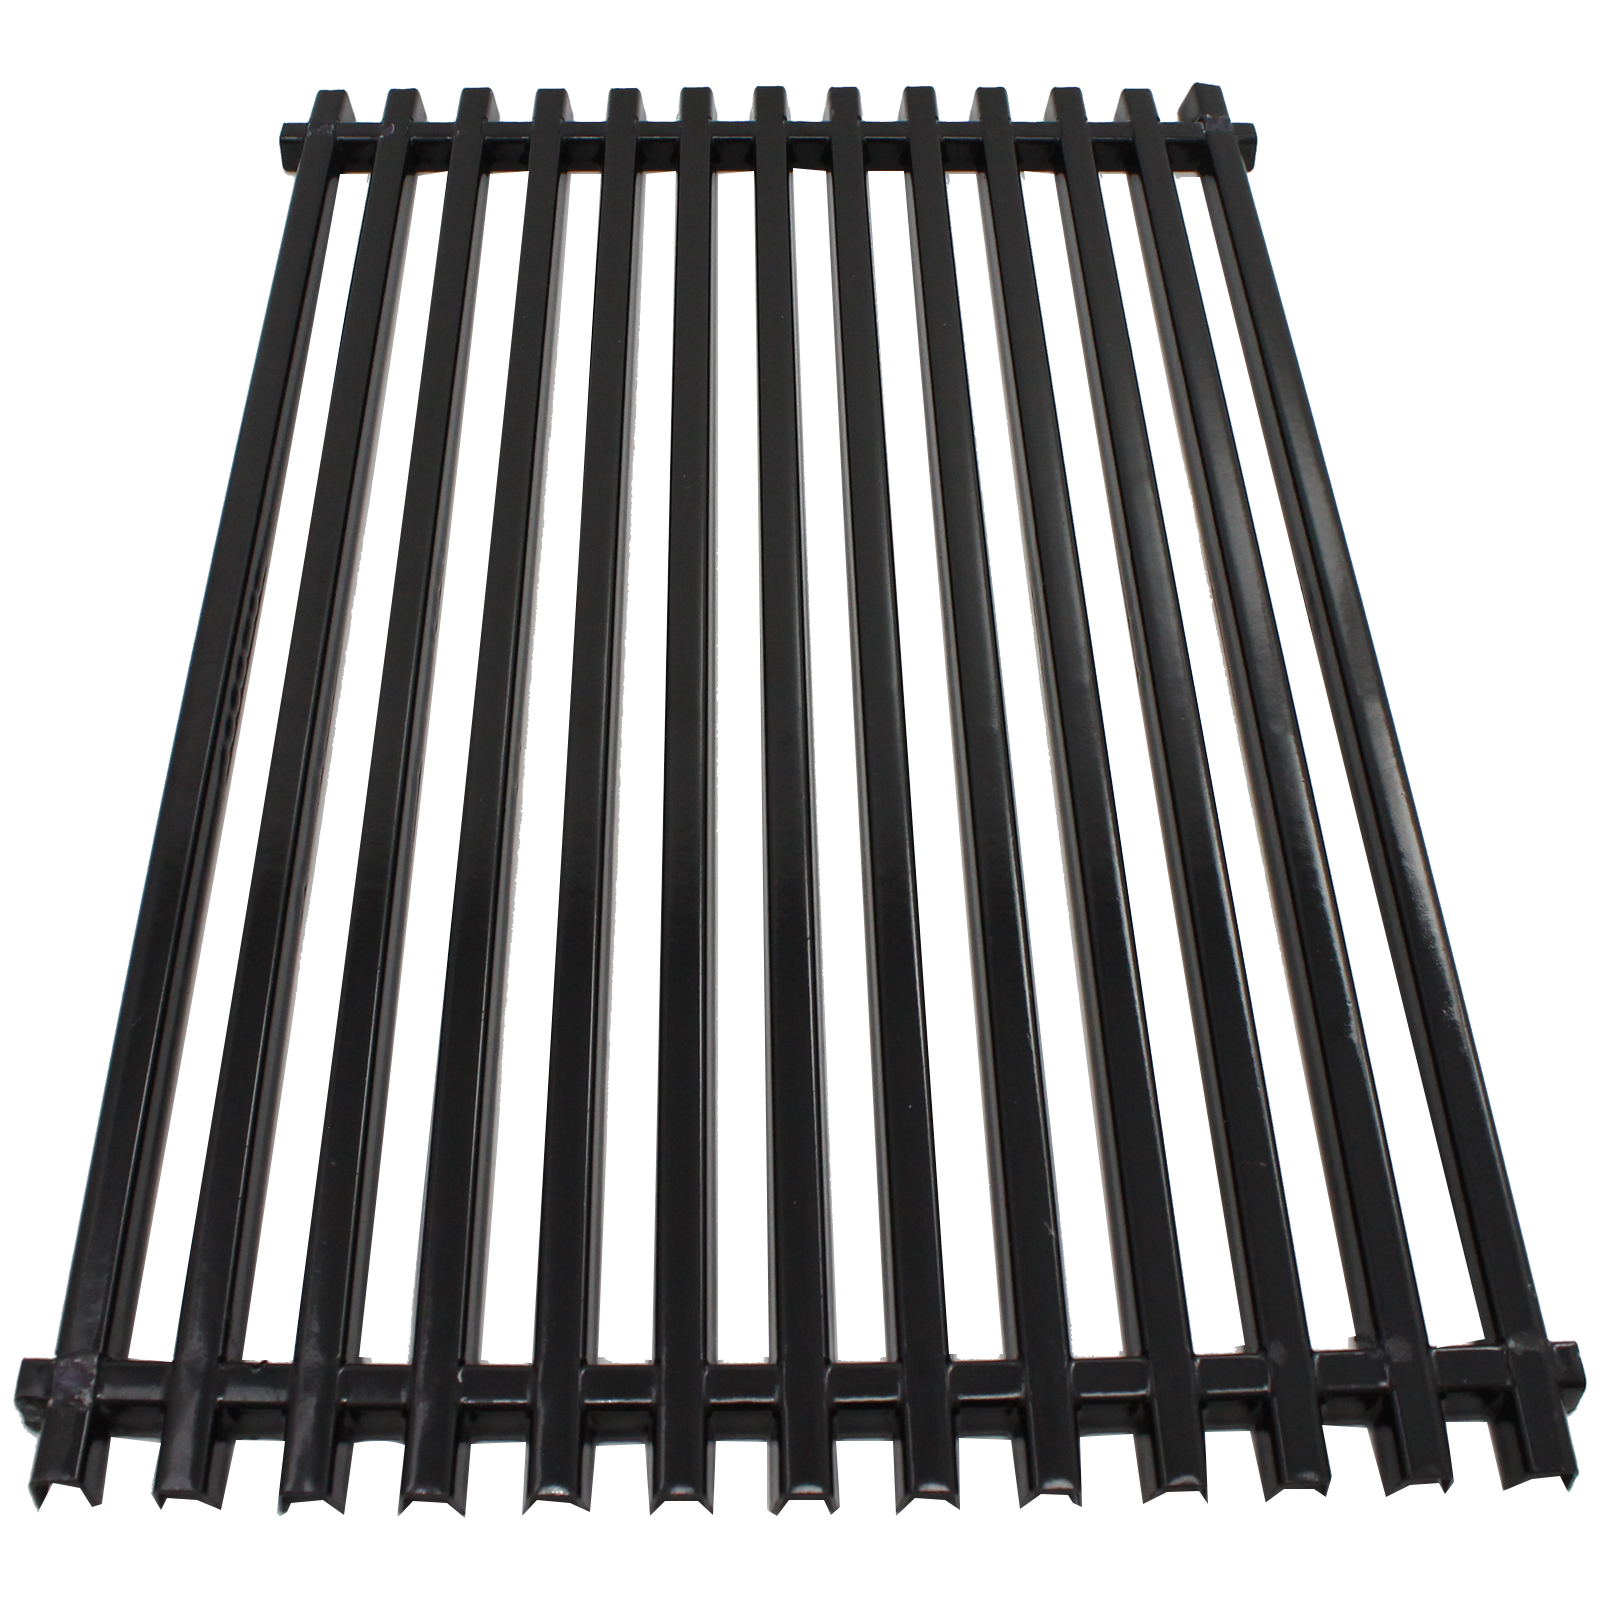 BBQ Grill Cooking Grates Replacement Parts for Kalamazoo Pedestal - Compatible Barbeque Porcelain Coated Steel Grid 17 3/4" - image 3 of 4